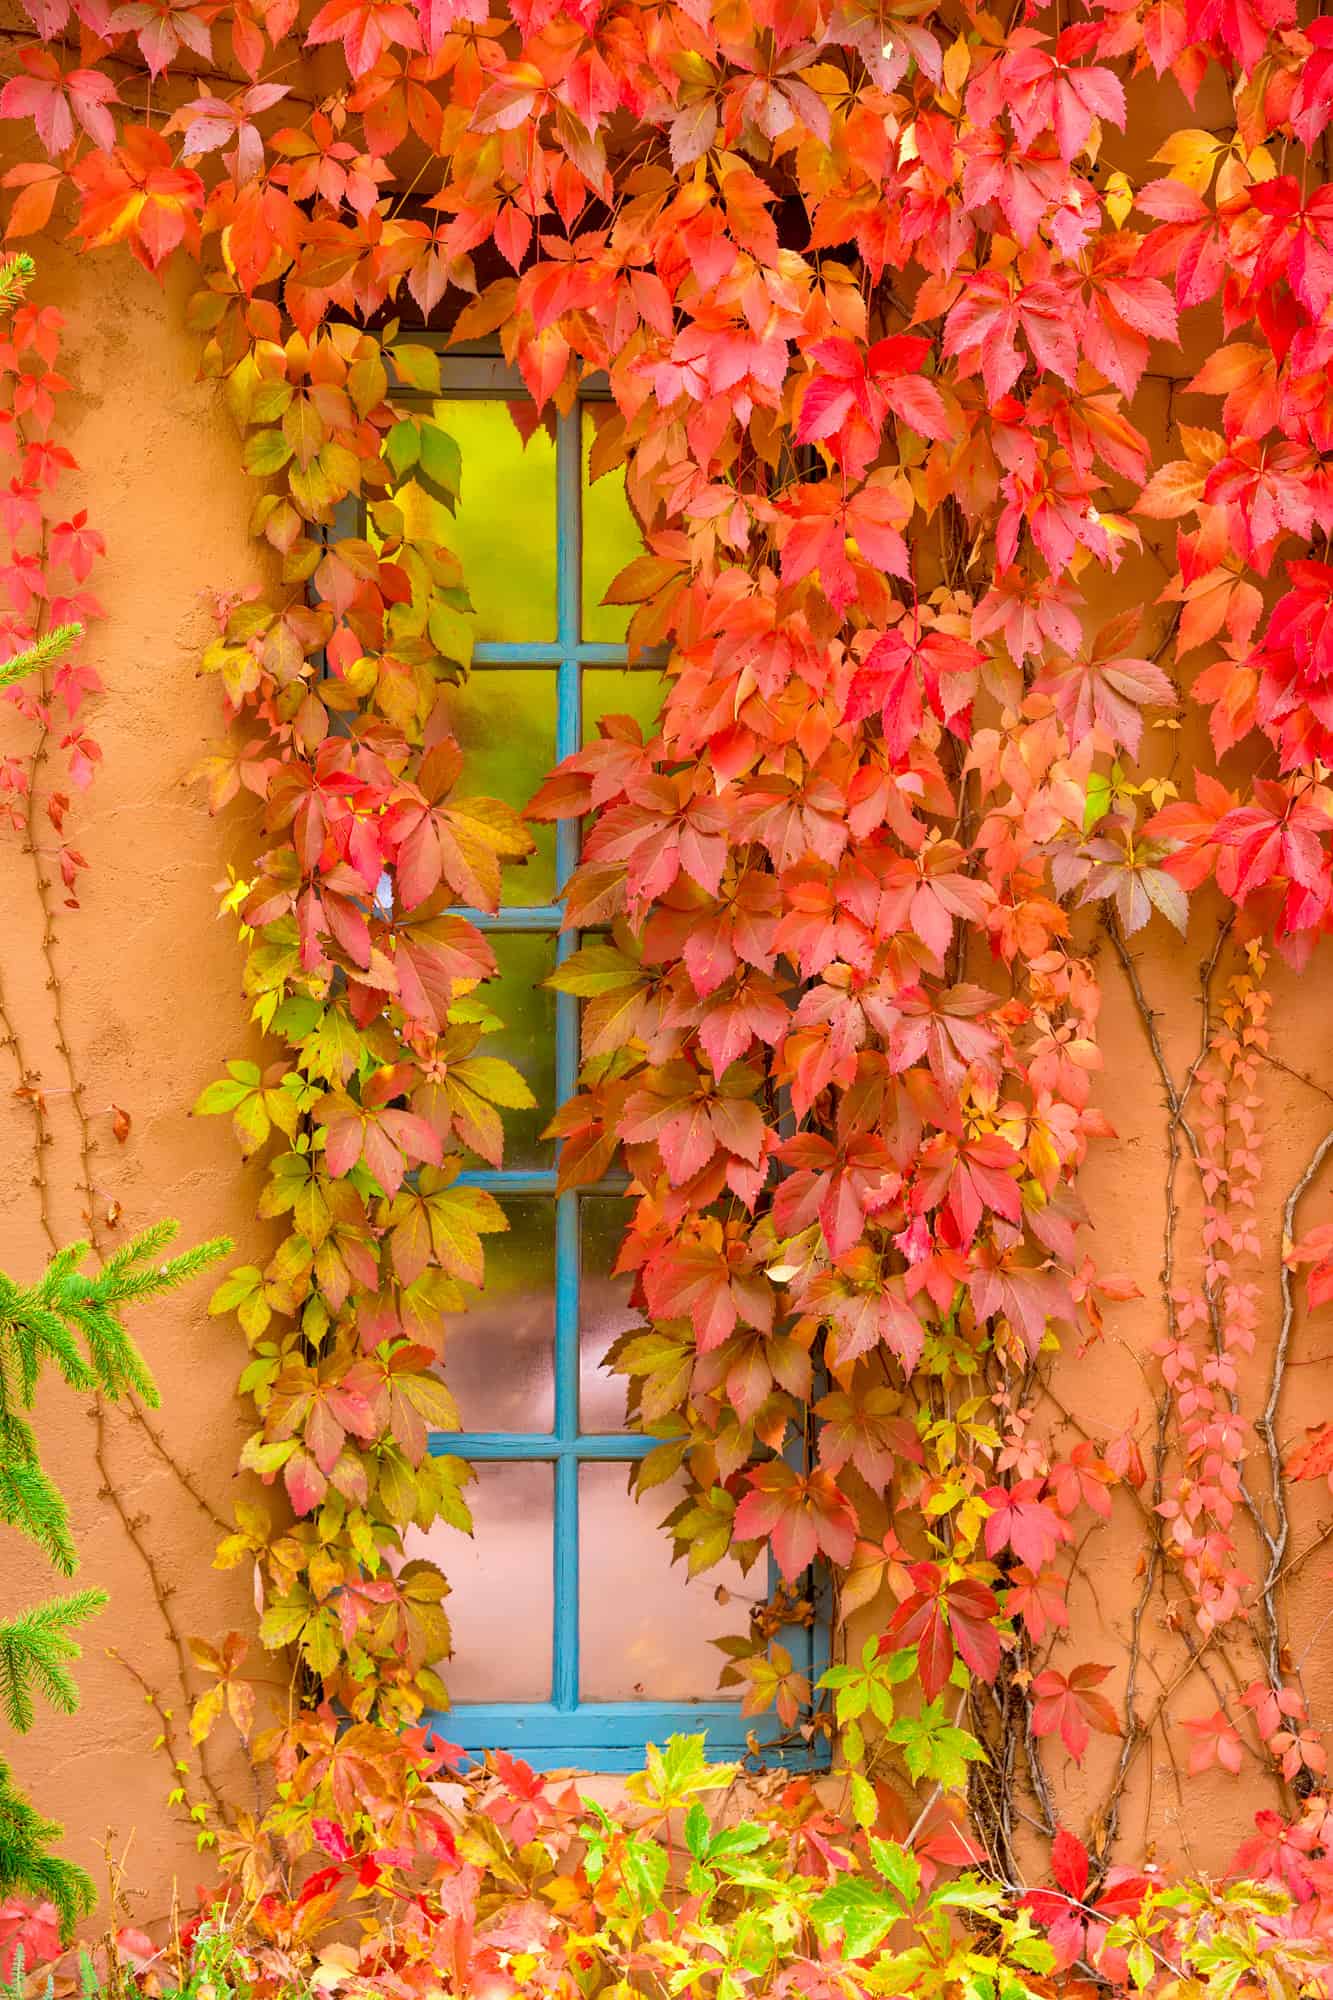 bright fall leaves of red and yellow on vines from a blue window set in an adobe house in santa fe, new mexico